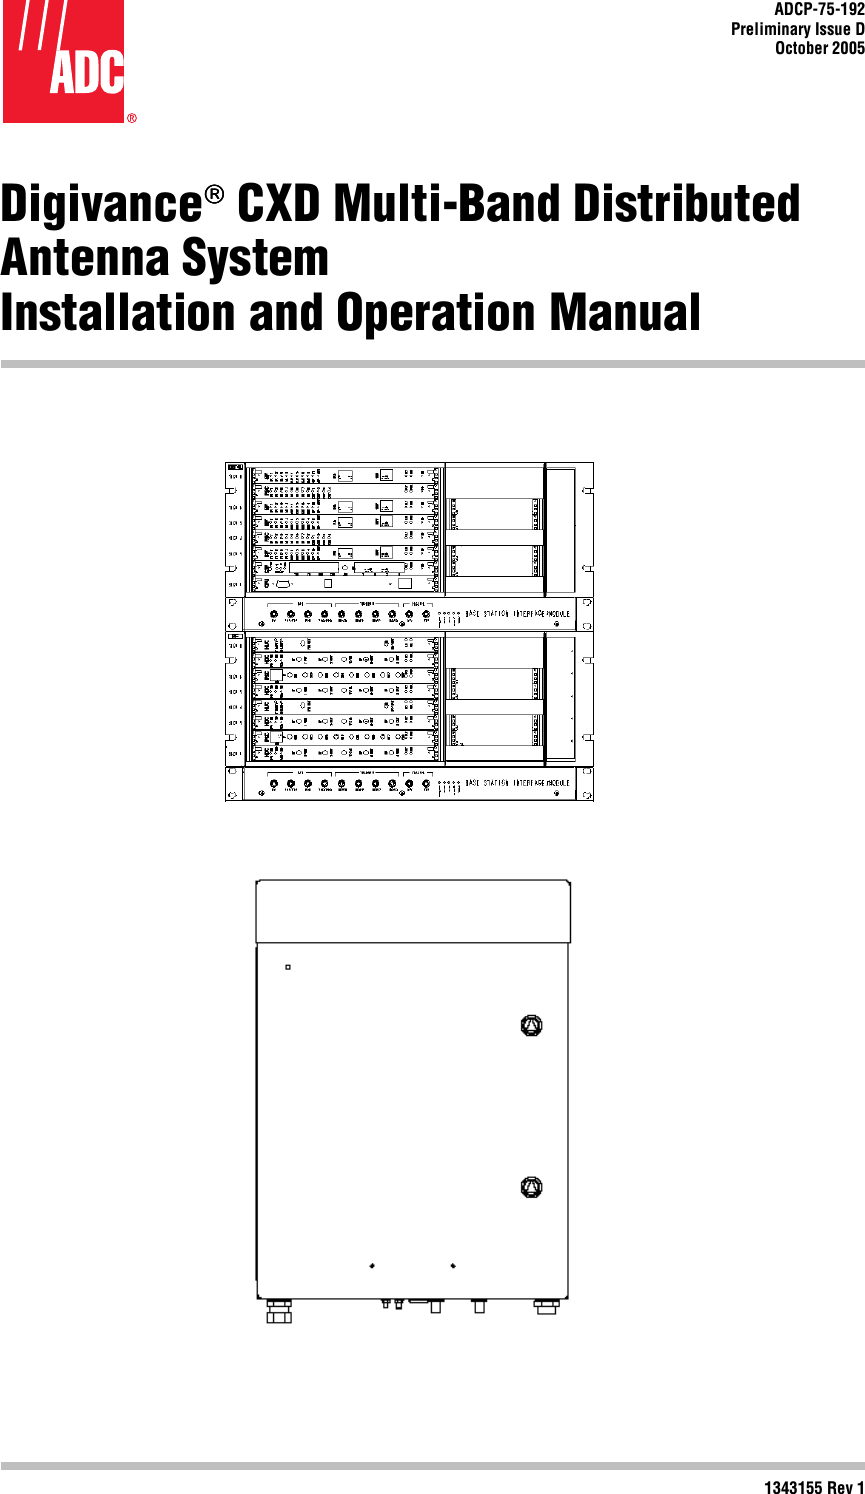     ADCP-75-192 Preliminary Issue D October 2005    Digivance CXD Multi-Band Distributed Antenna System Installation and Operation Manual        1343155 Rev 1  